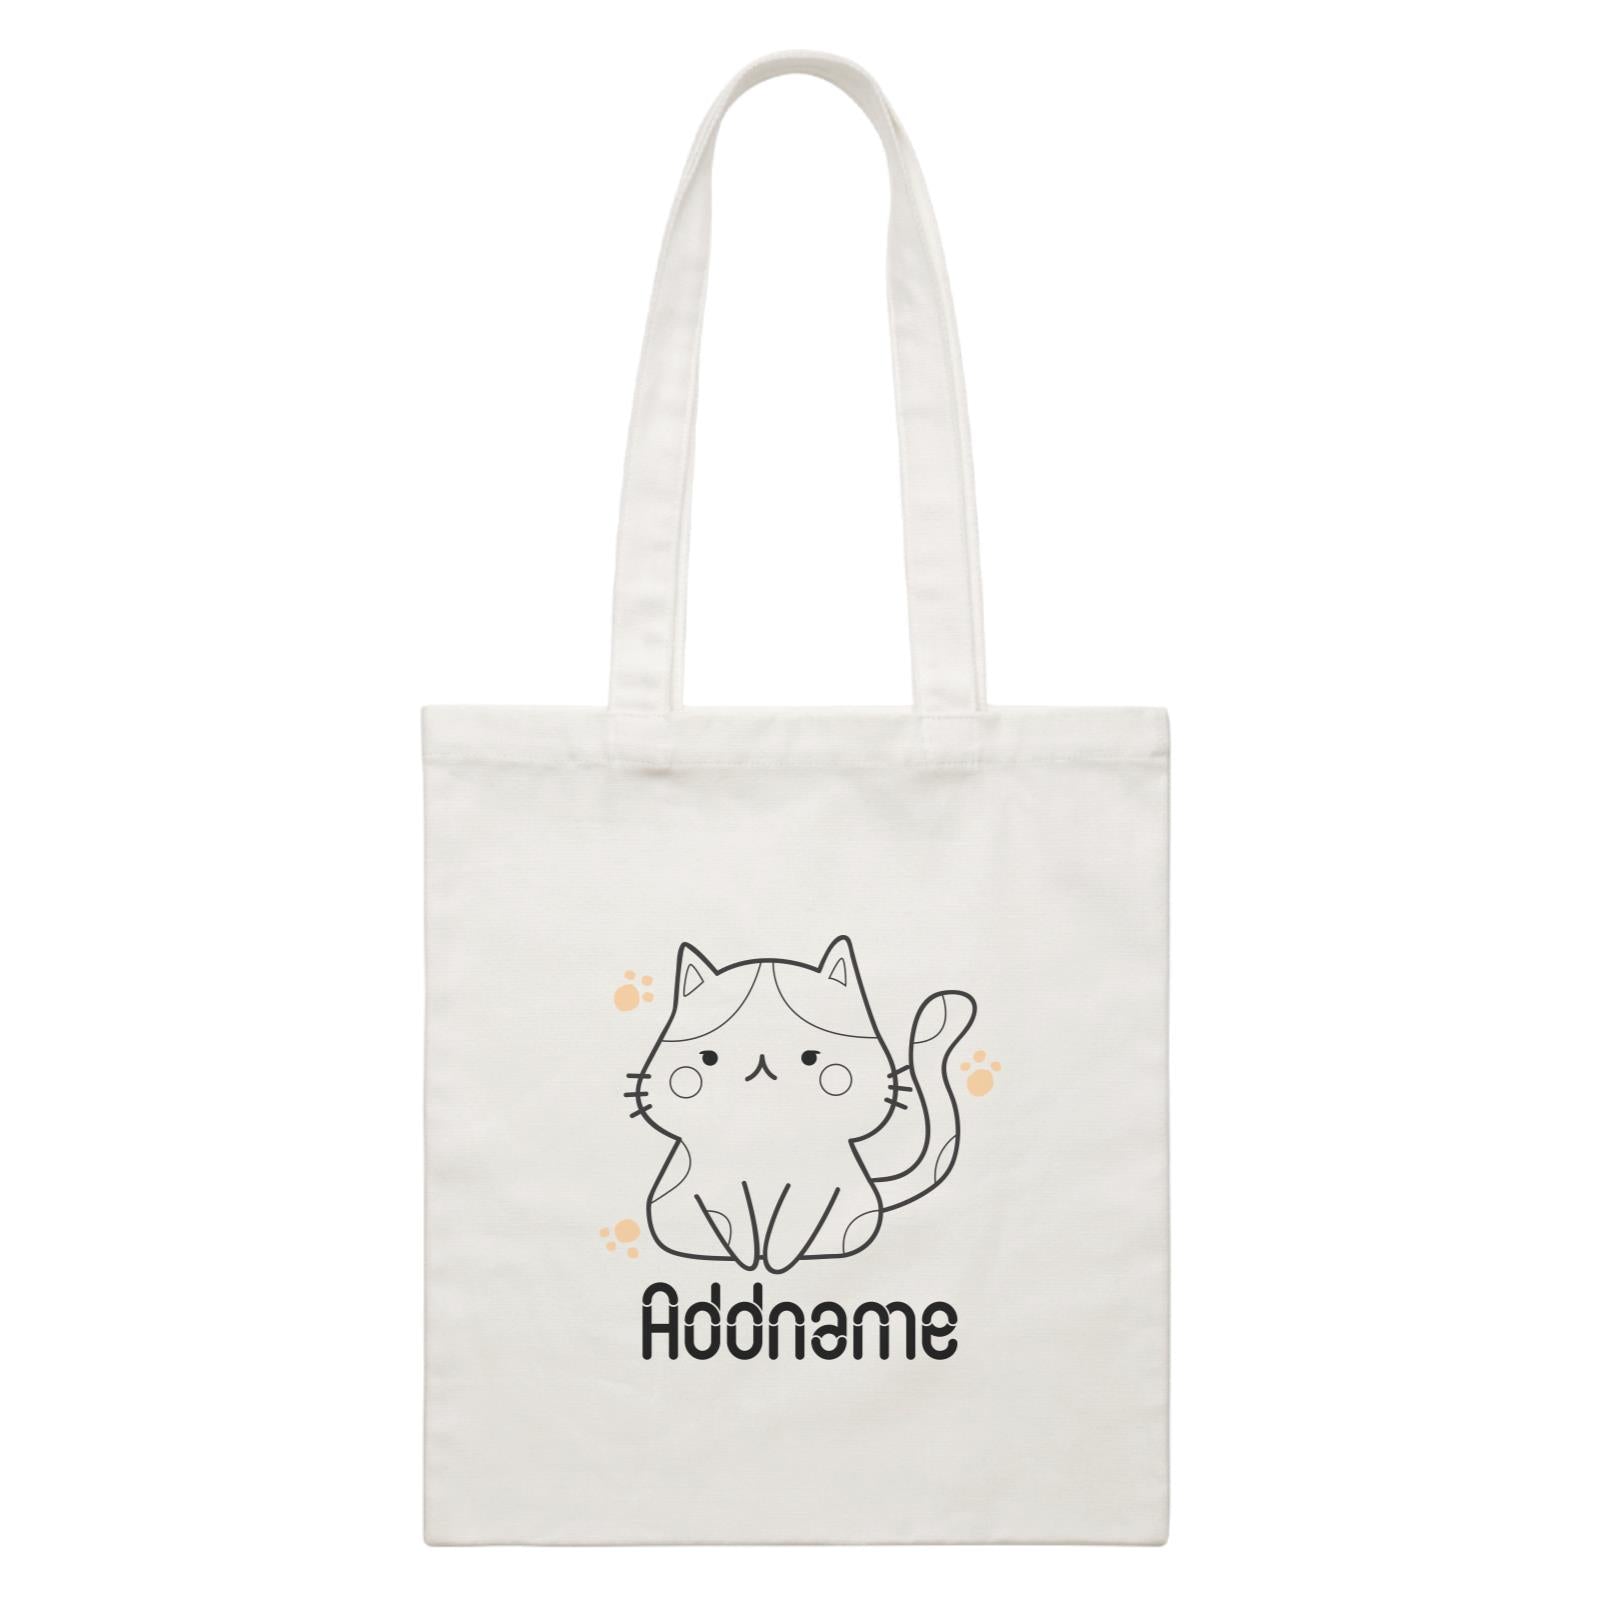 Coloring Outline Cute Hand Drawn Animals Cats Cat Addname White White Canvas Bag